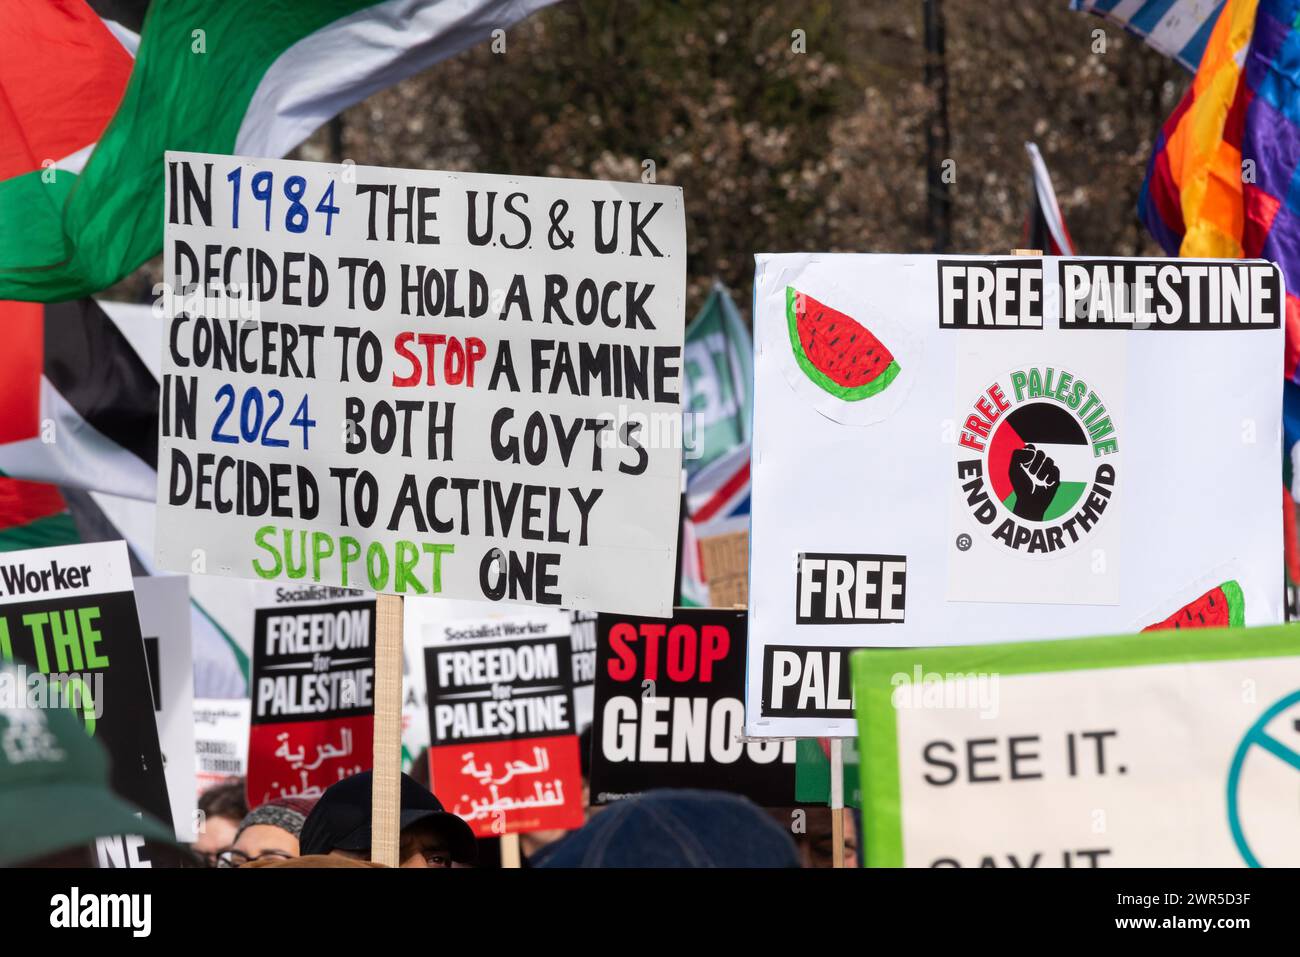 Pro Palestine protest march in London, UK, protesting against the conflict in Gaza and against Israel occupation. Placard with Live Aid reference Stock Photo